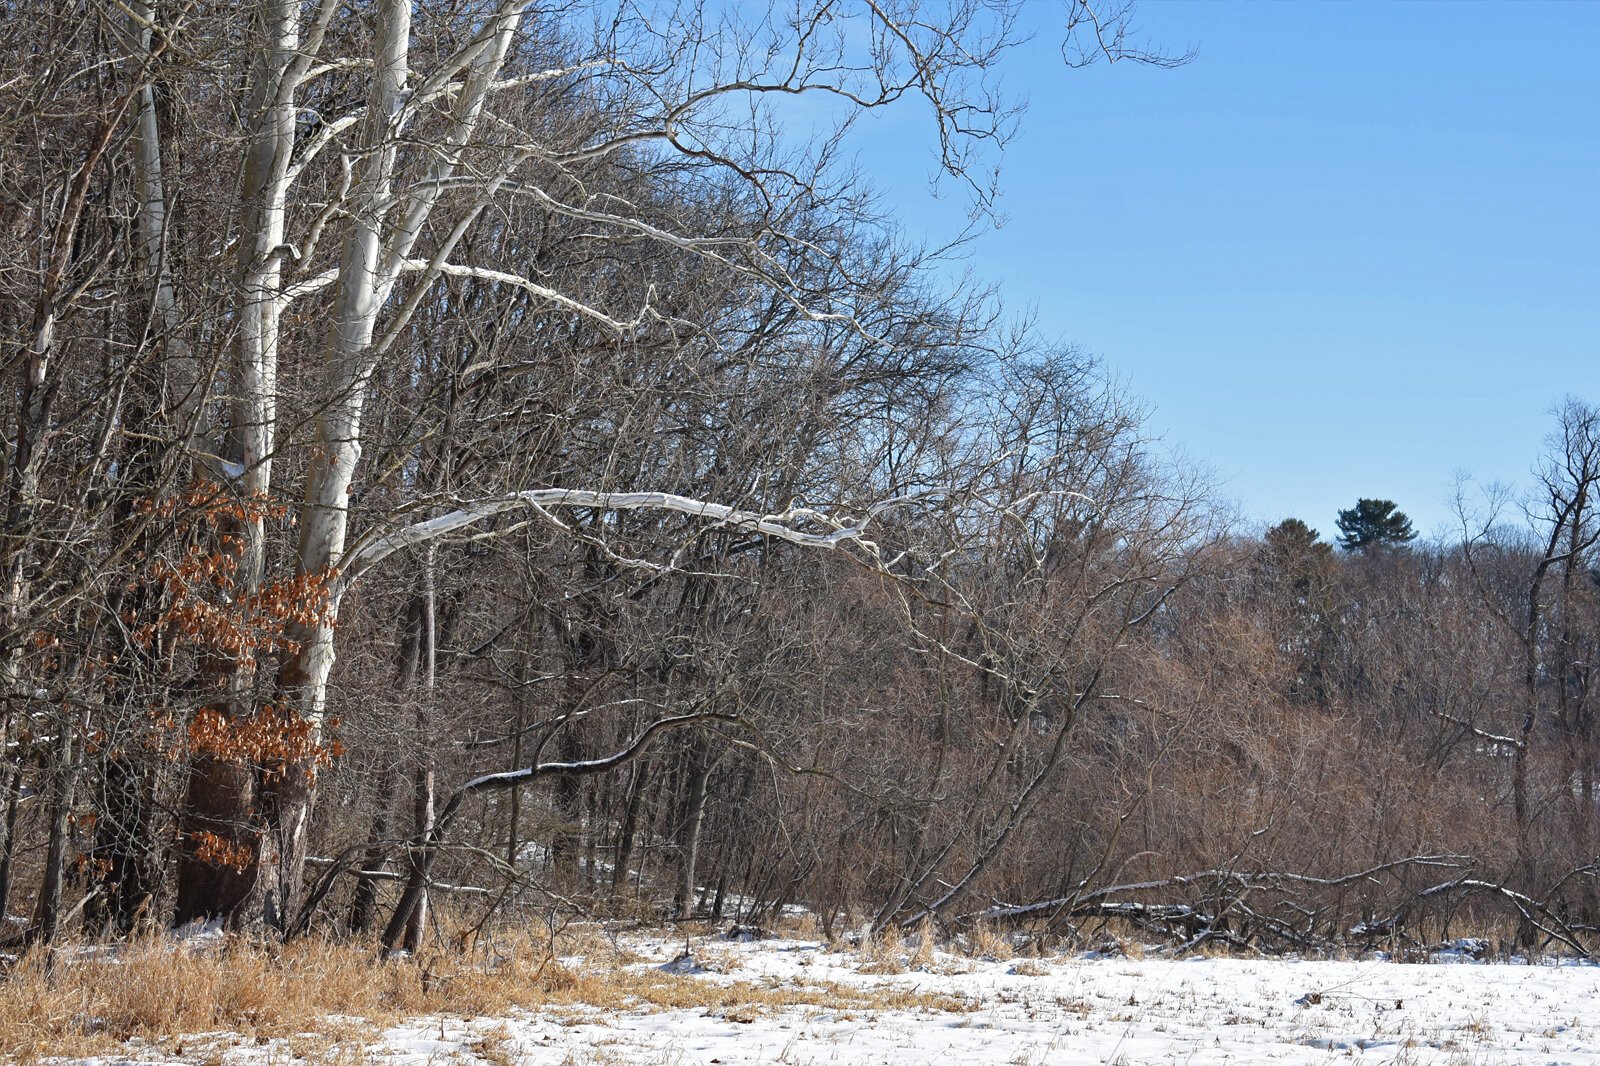 Sycamore trees set off the winter landscape at the new Armintrout-Milbocker Nature Preserve.